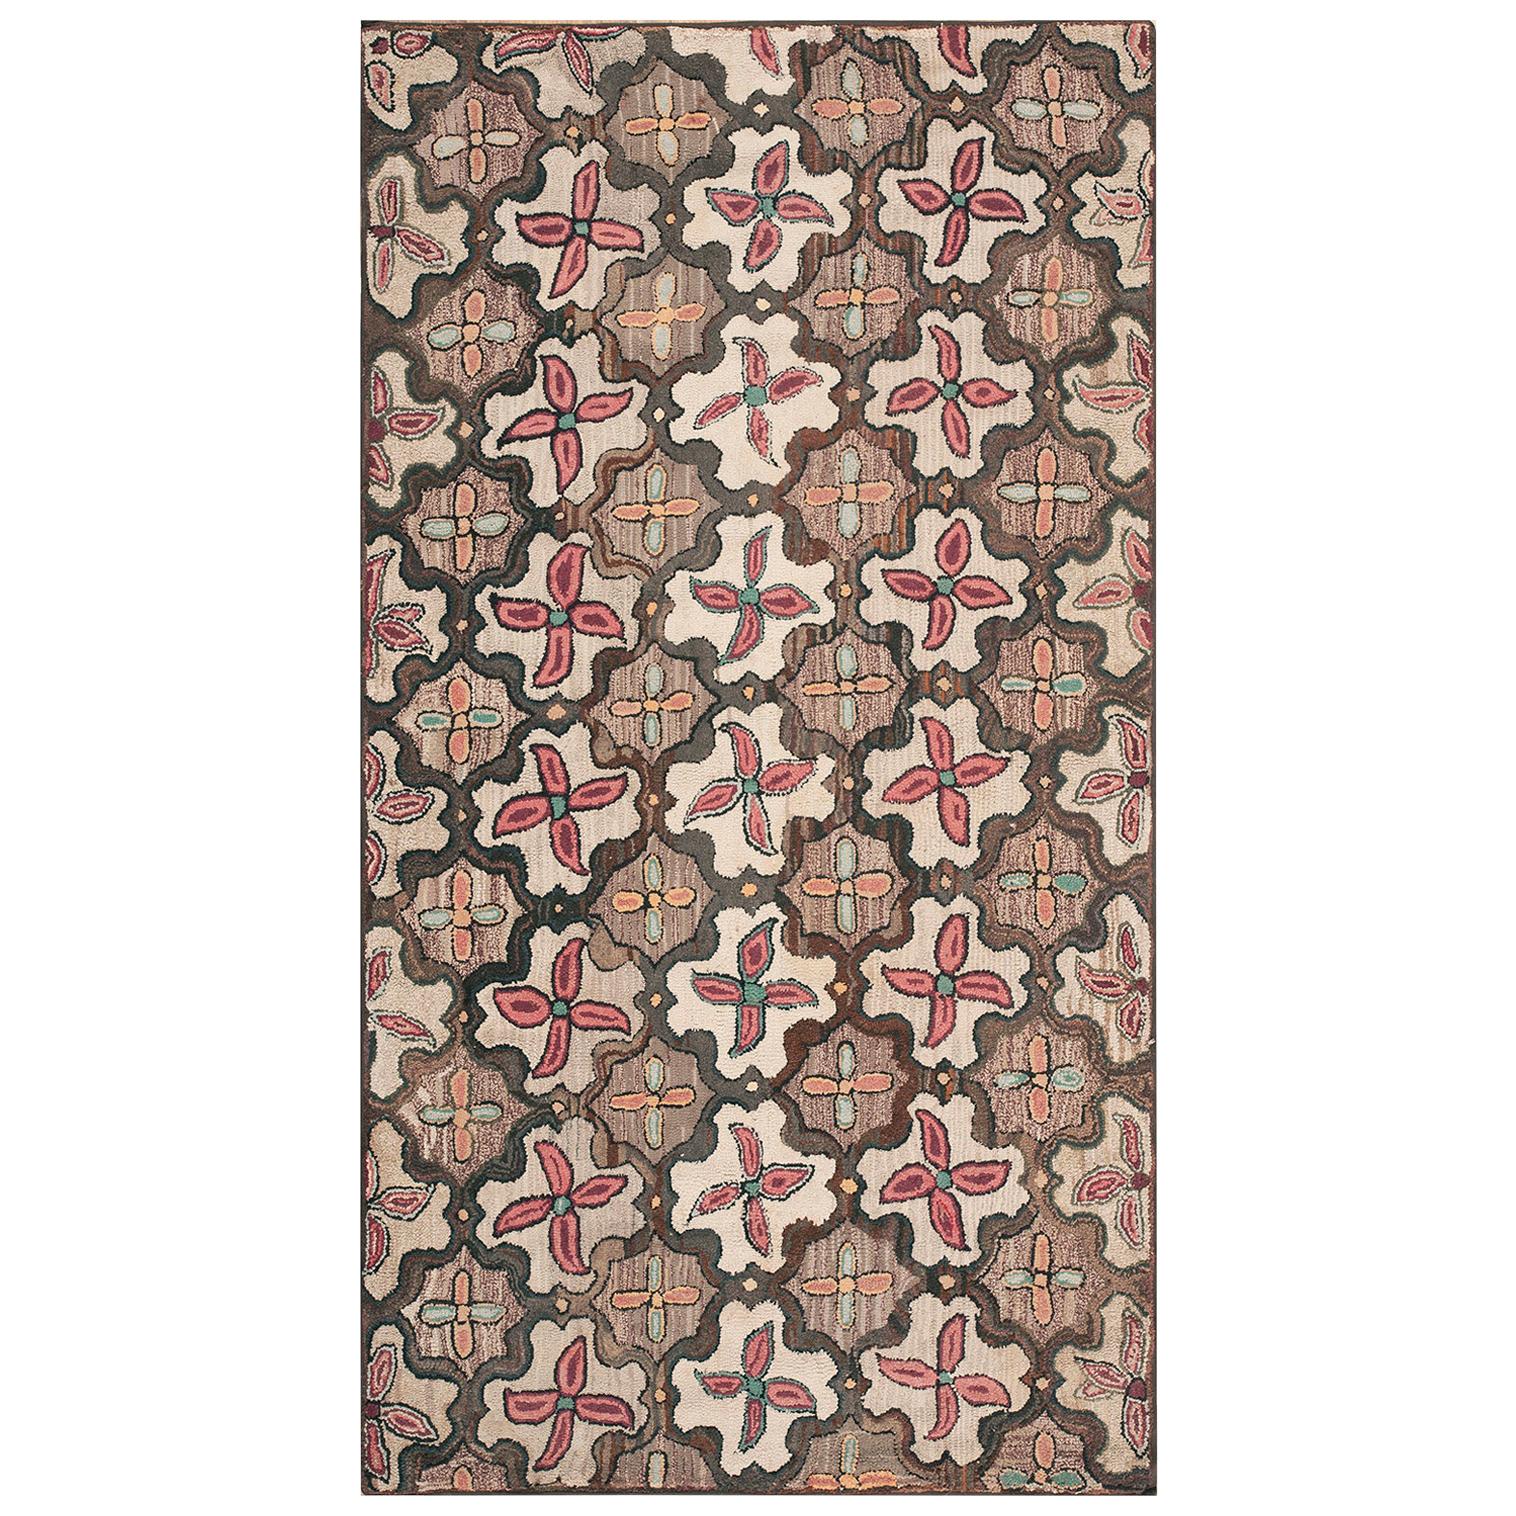 Late 19th Century American Hooked Rug ( 4' 5" x 8' 1" - 135 x 245 cm )  For Sale